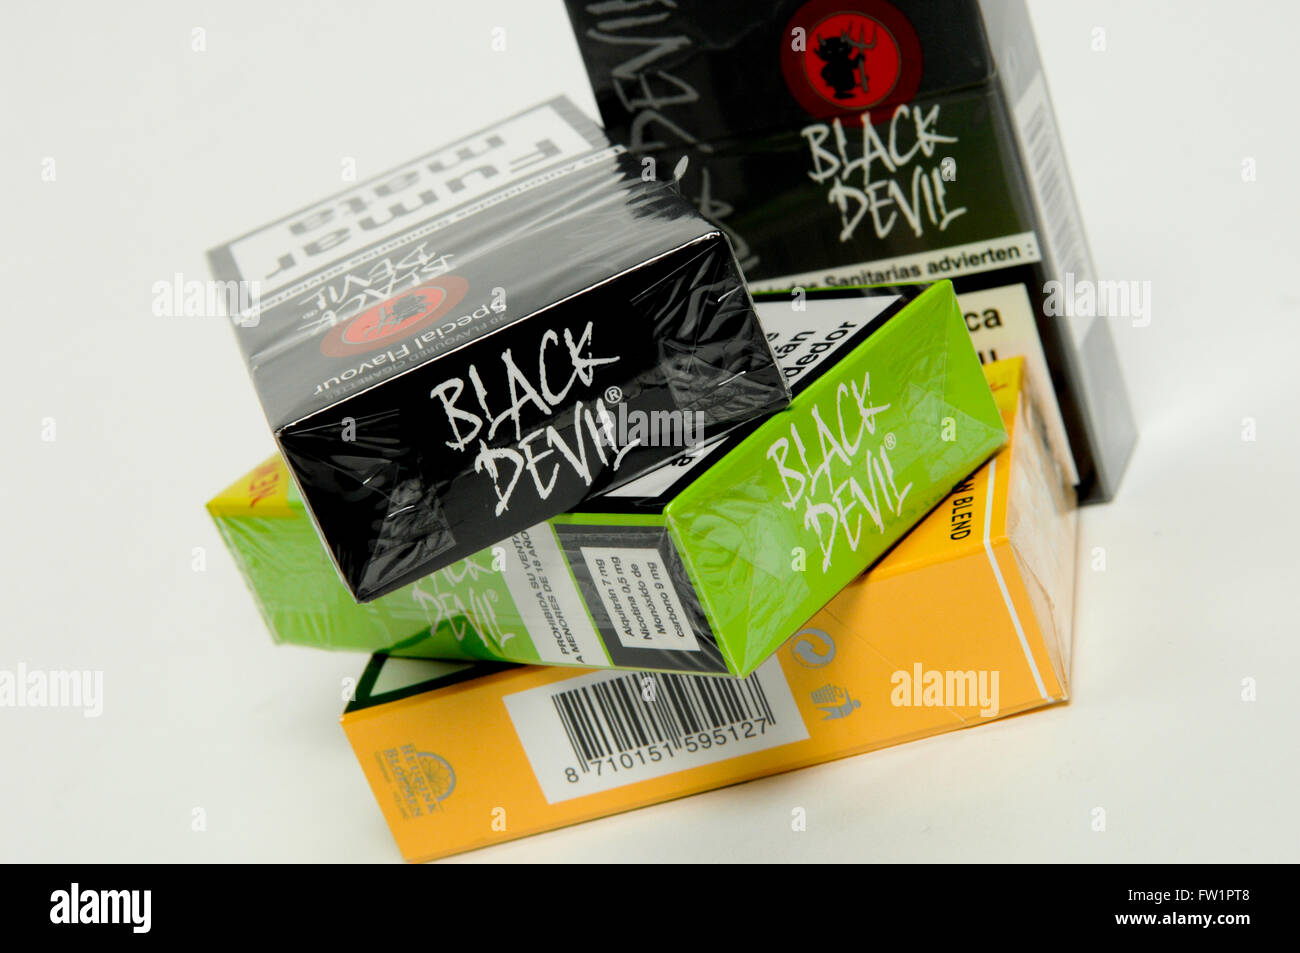 Selection of Black Devil tobacco products Stock Photo - Alamy